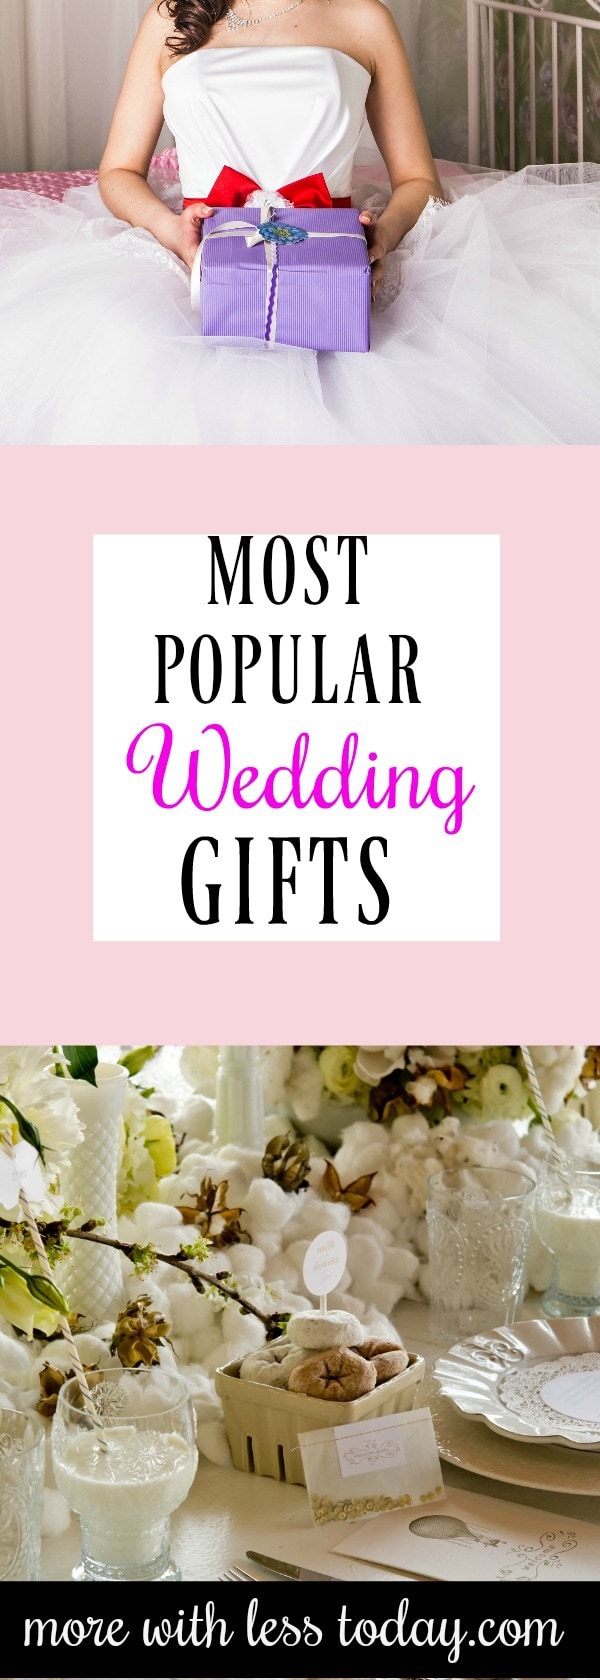 Top Registered Gifts for Weddings on Amazon &#8211; The Most Popular Wedding Gifts This Year